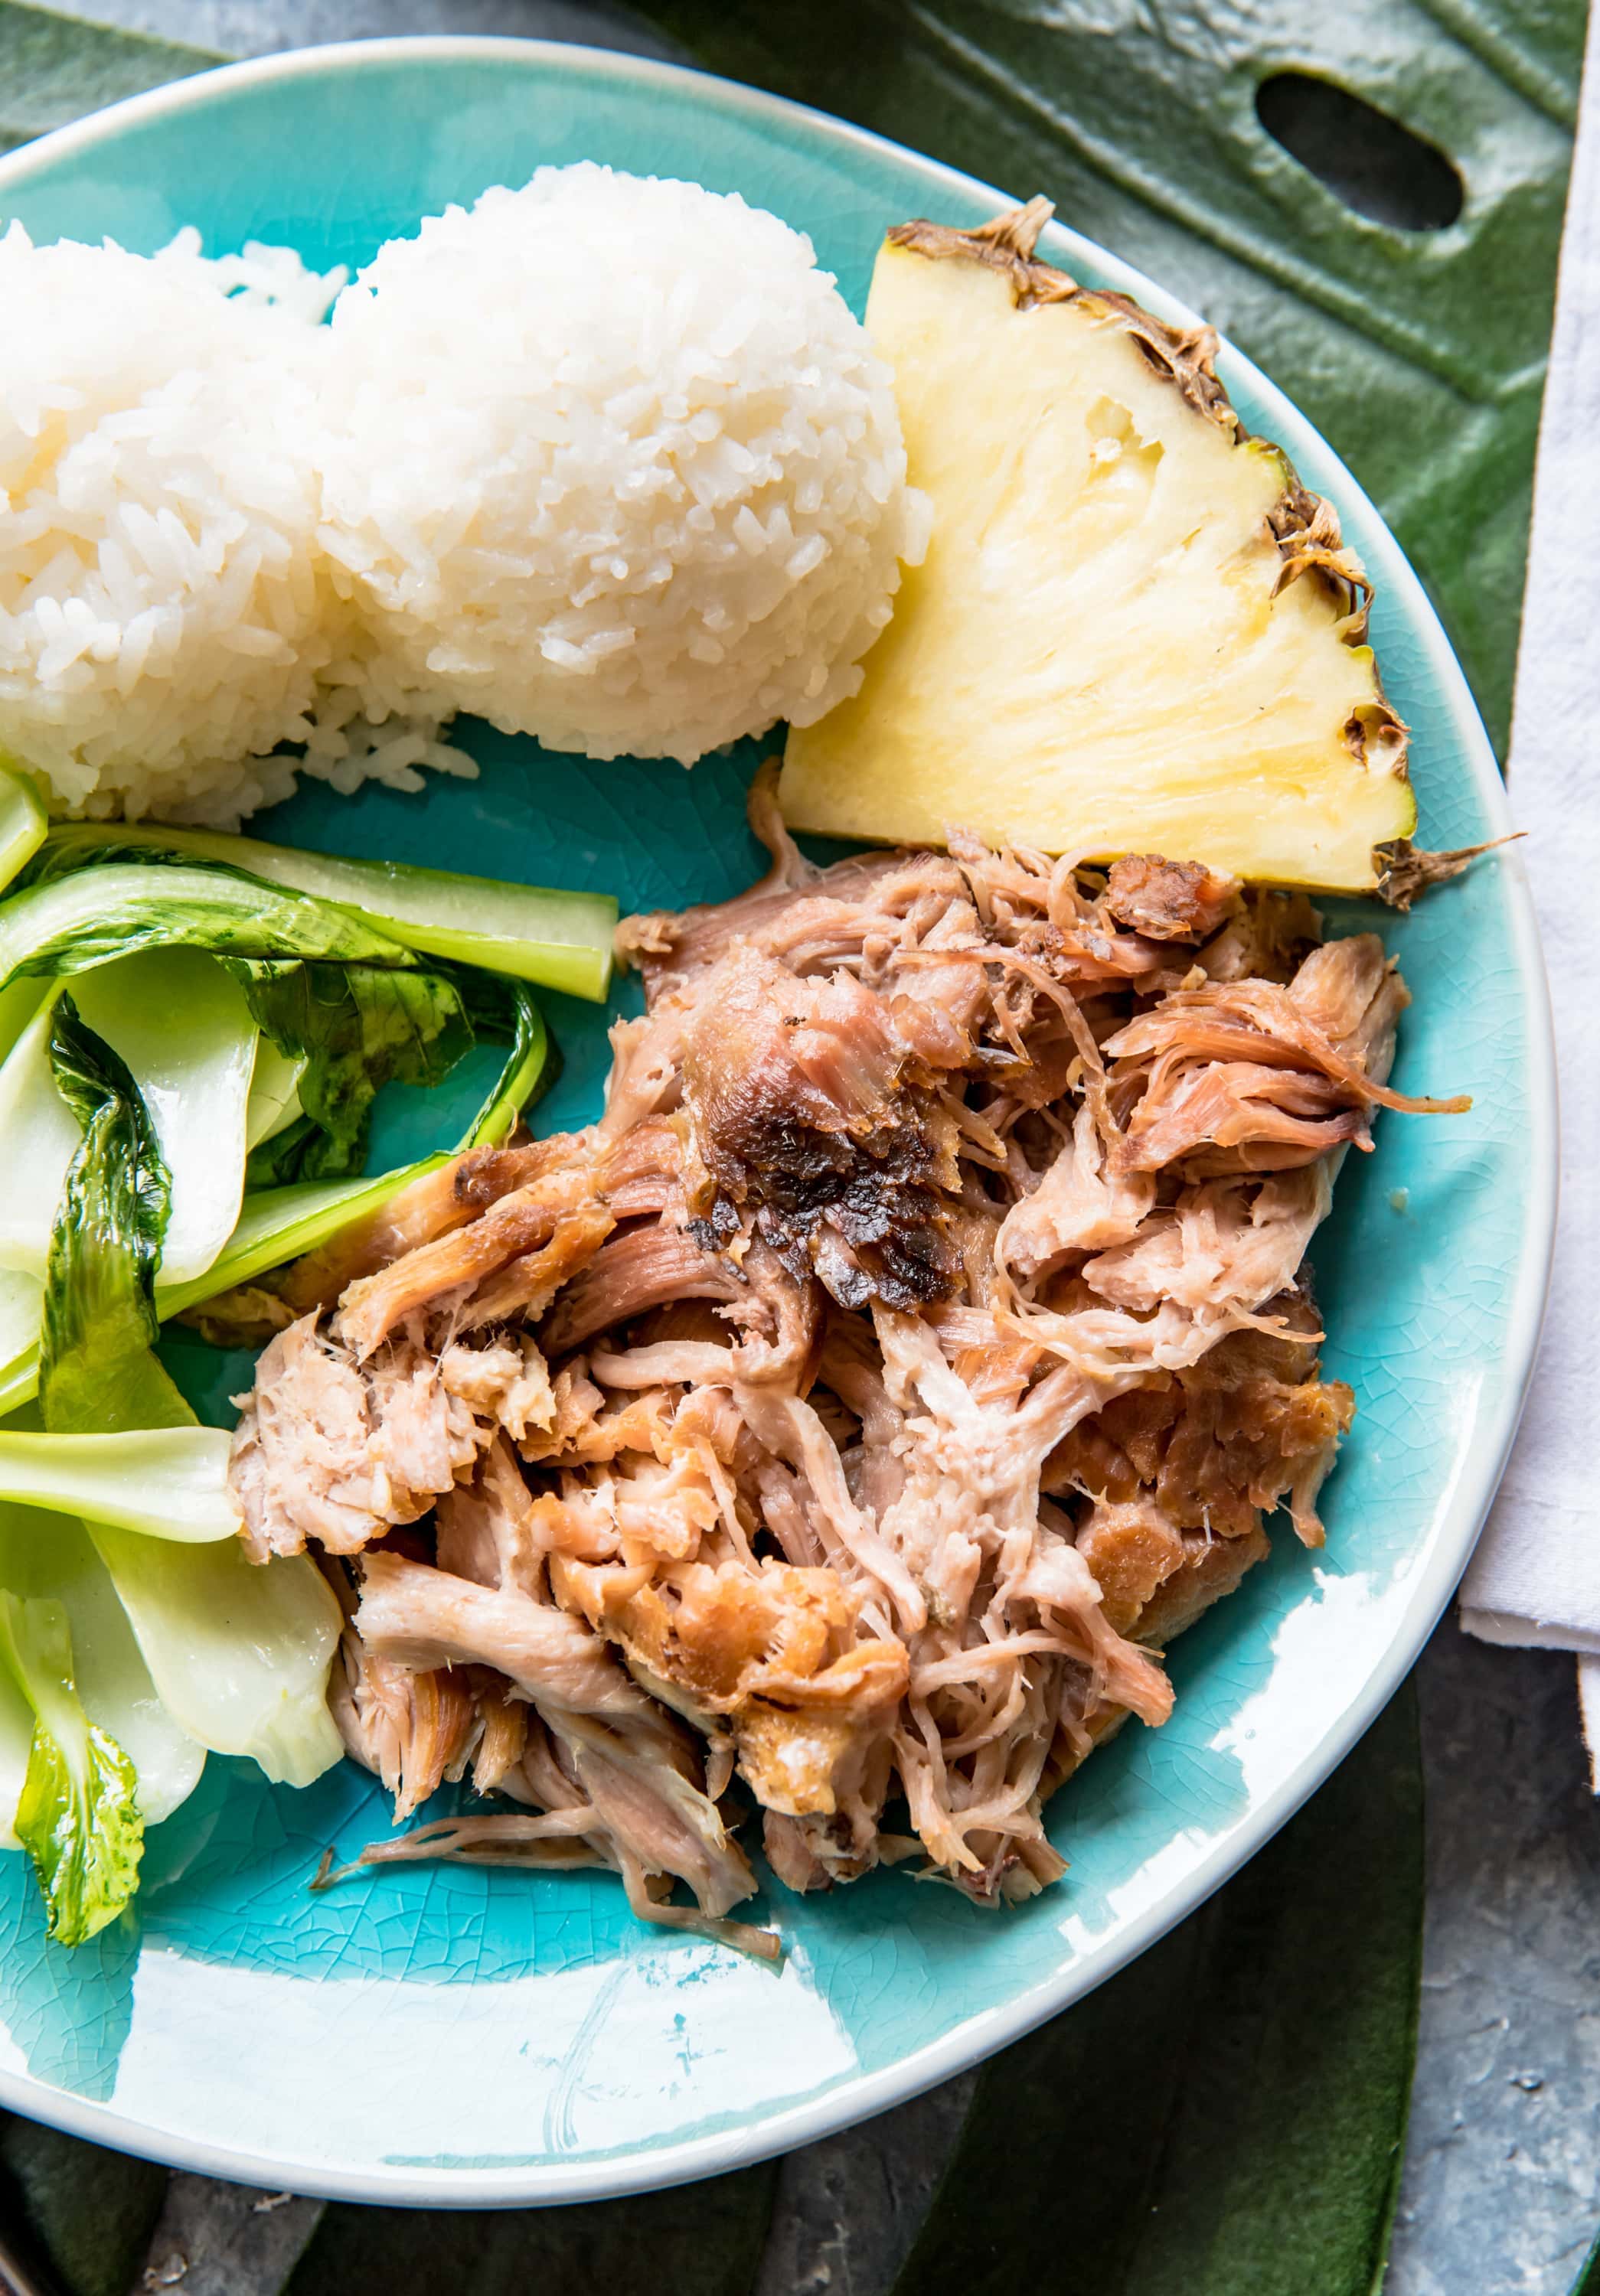 aqua plate with a Hawaiian kalua pork, baby bok choy, pineapple wedge, two scoops of white sticky rice.